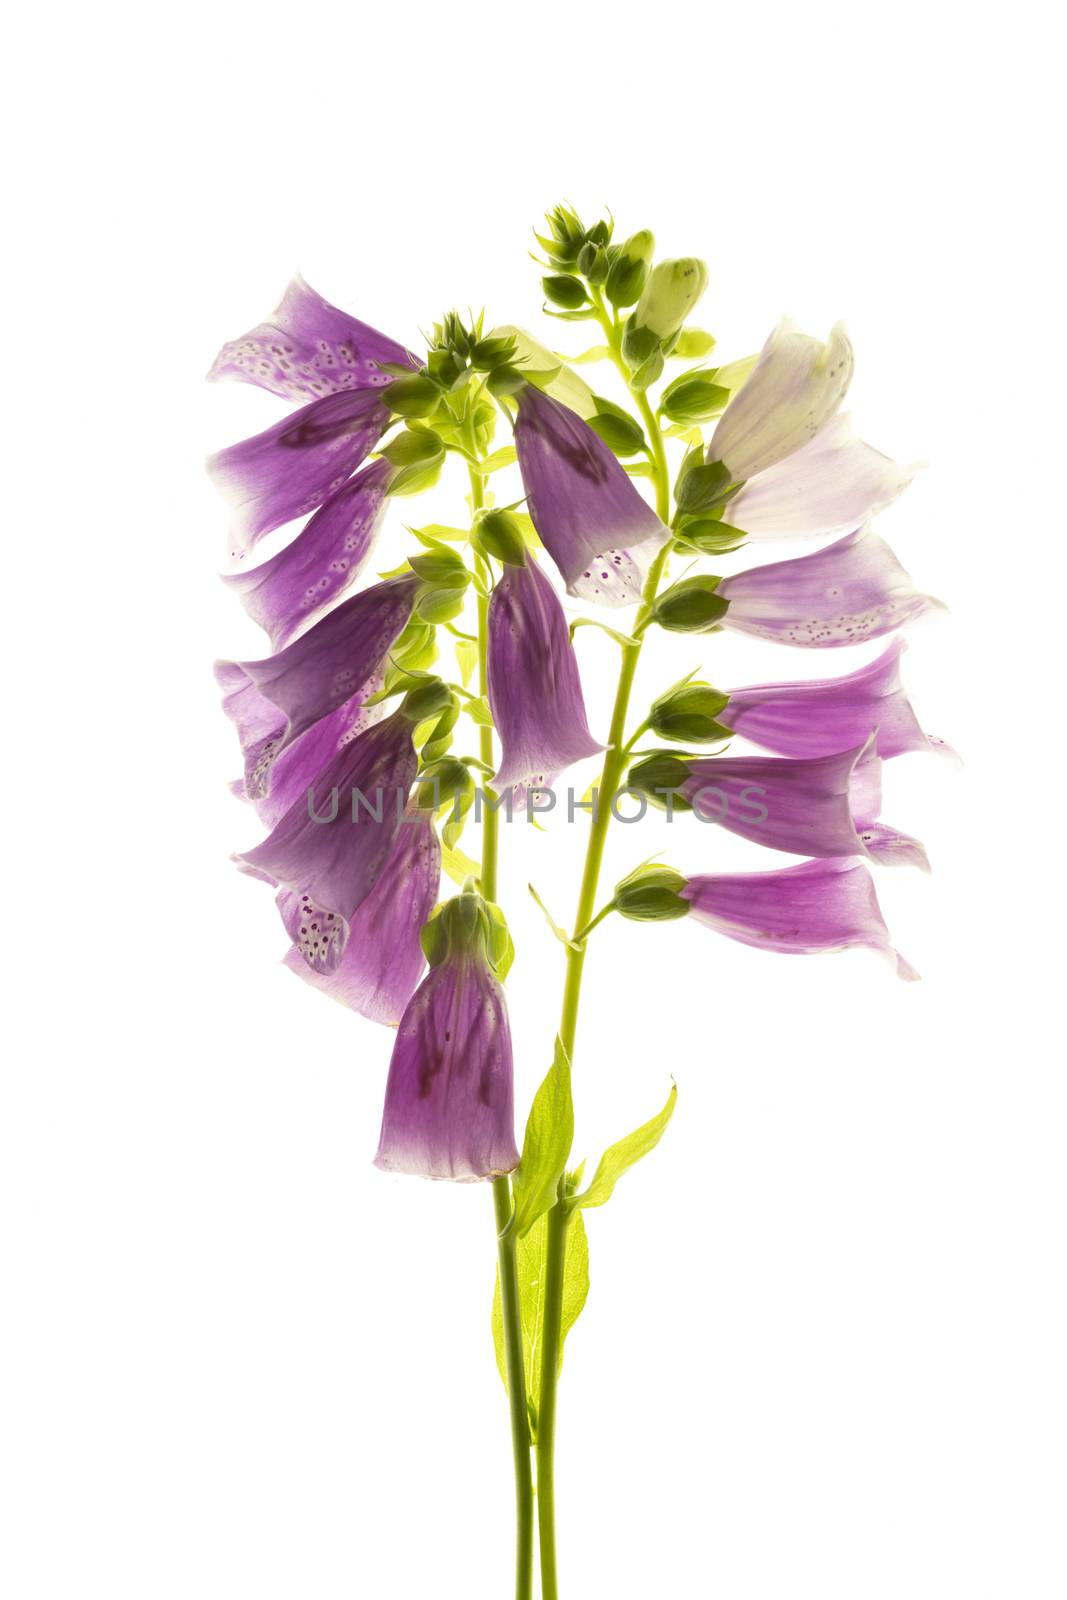 Purple foxglove flowers isolated on white background.